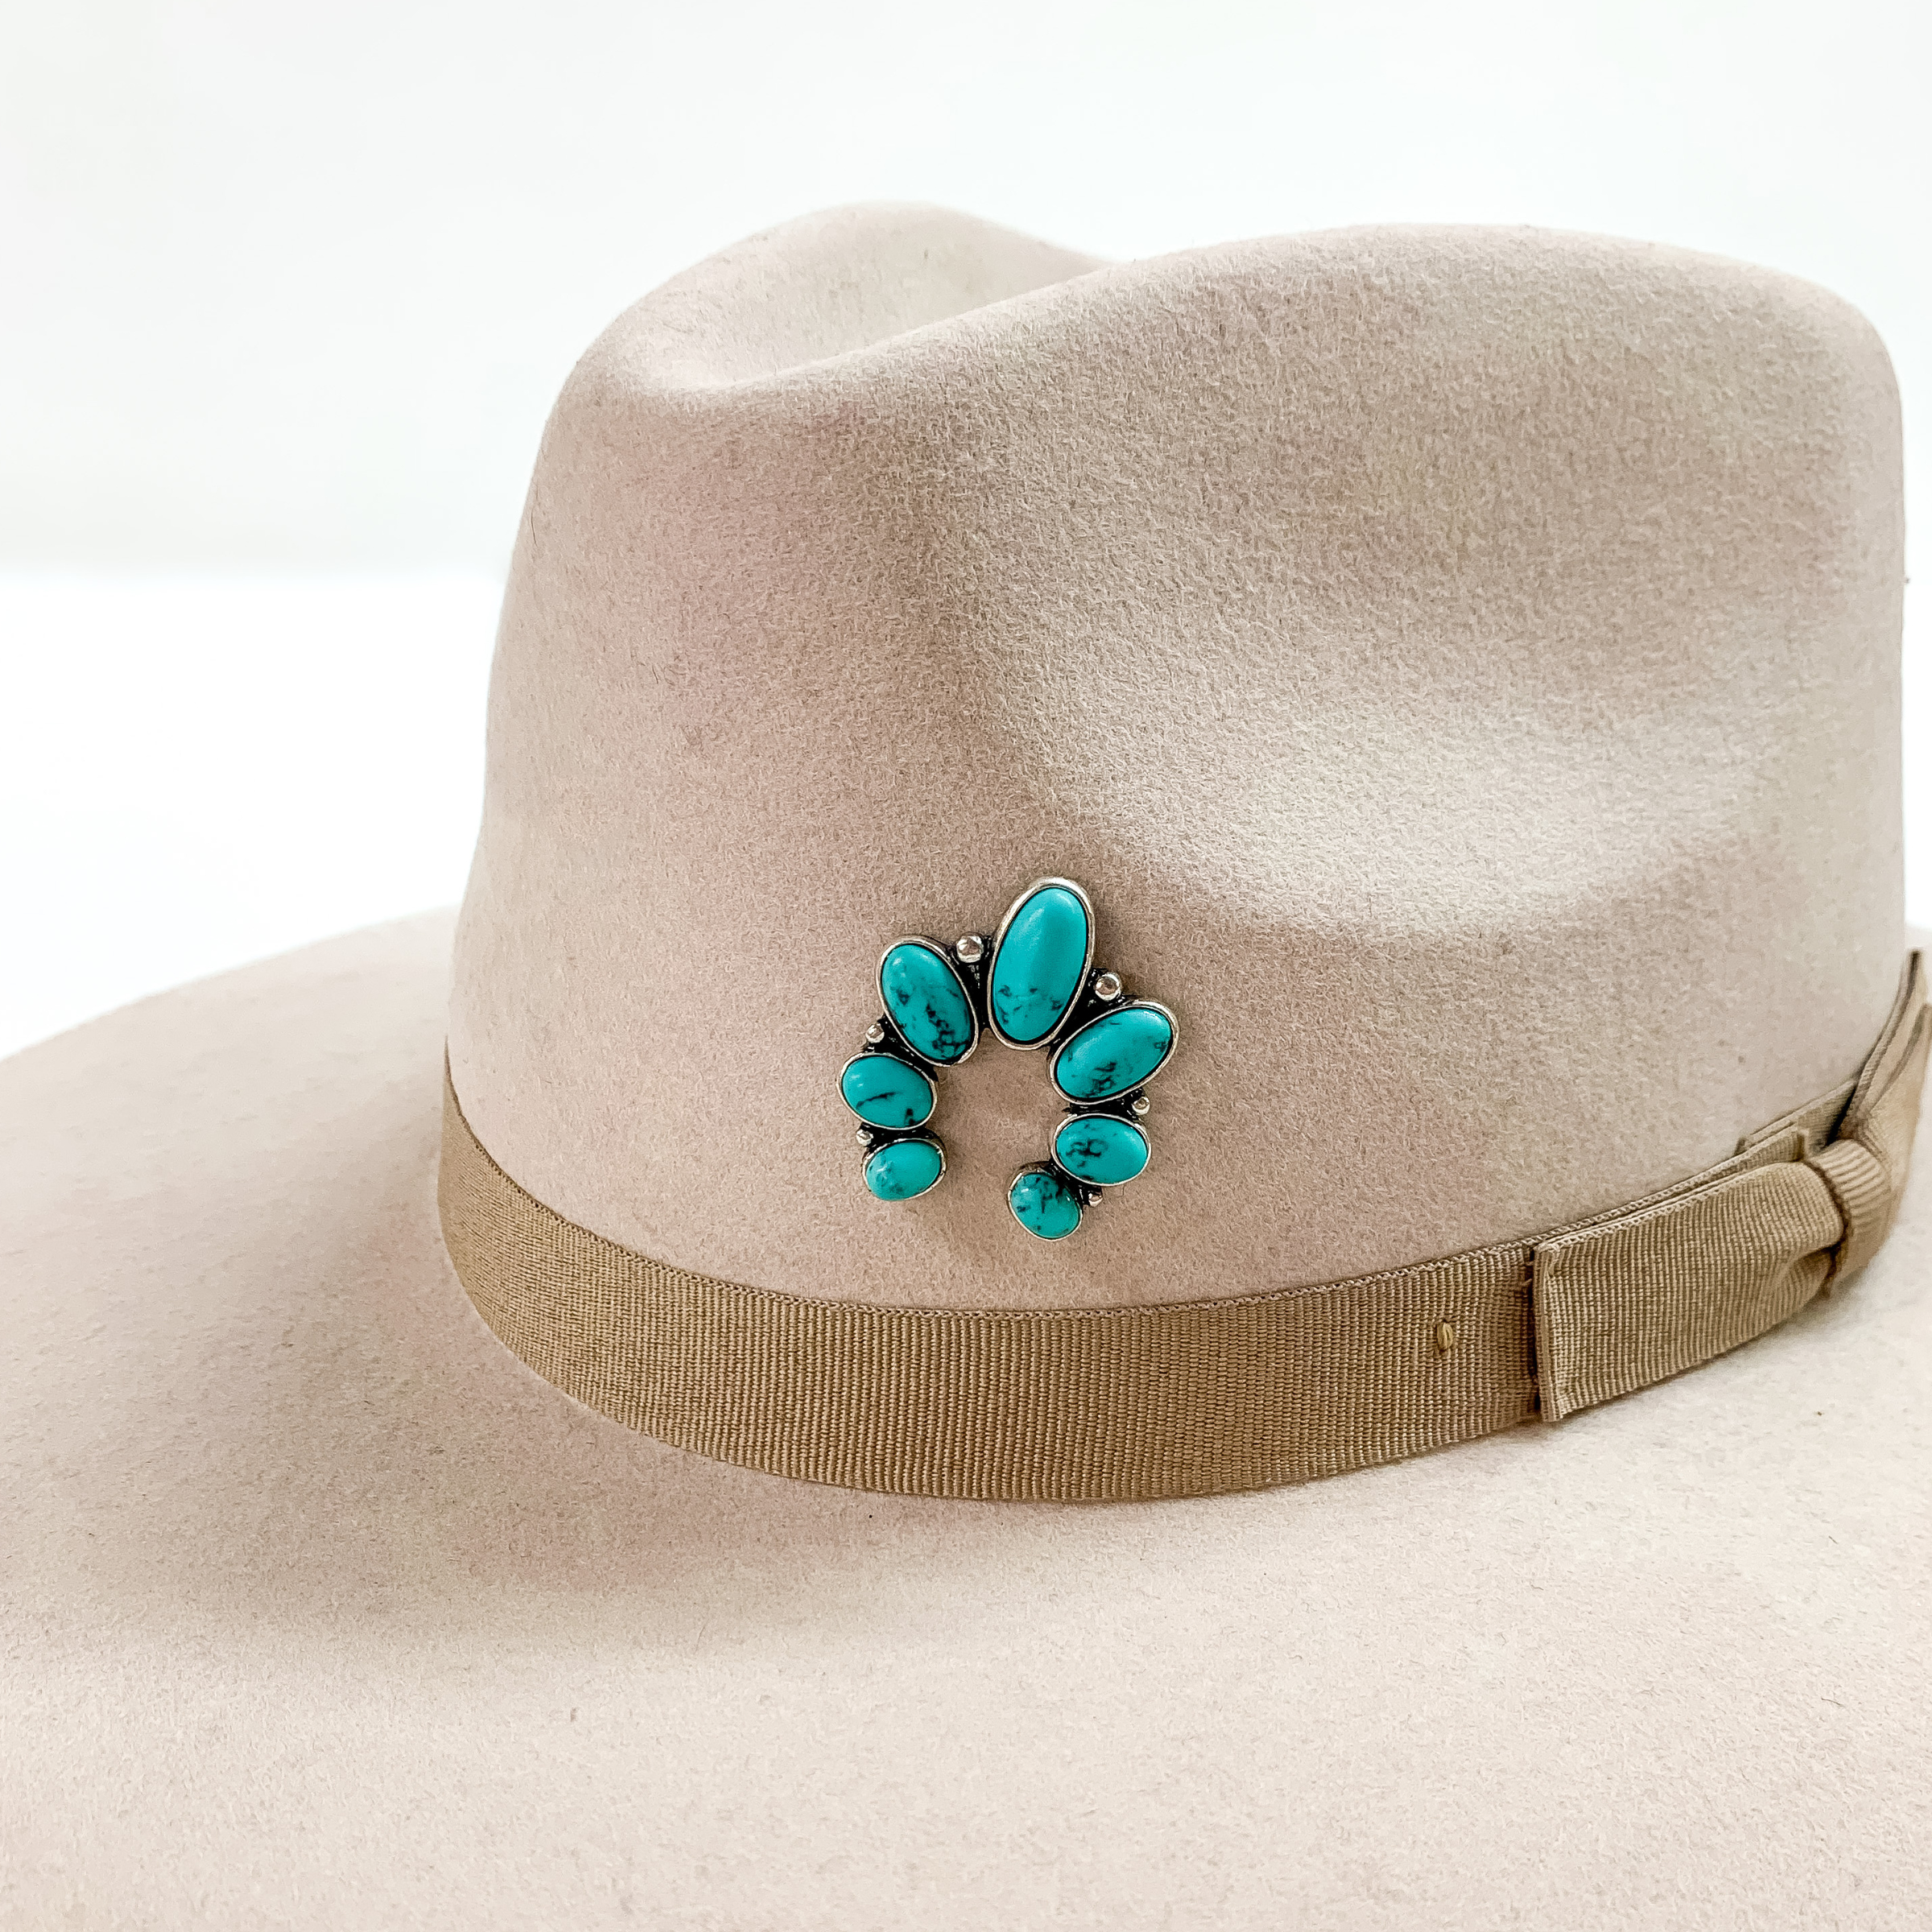 Naja Hat Pin with Turquoise Stones in Silver Tone - Giddy Up Glamour Boutique